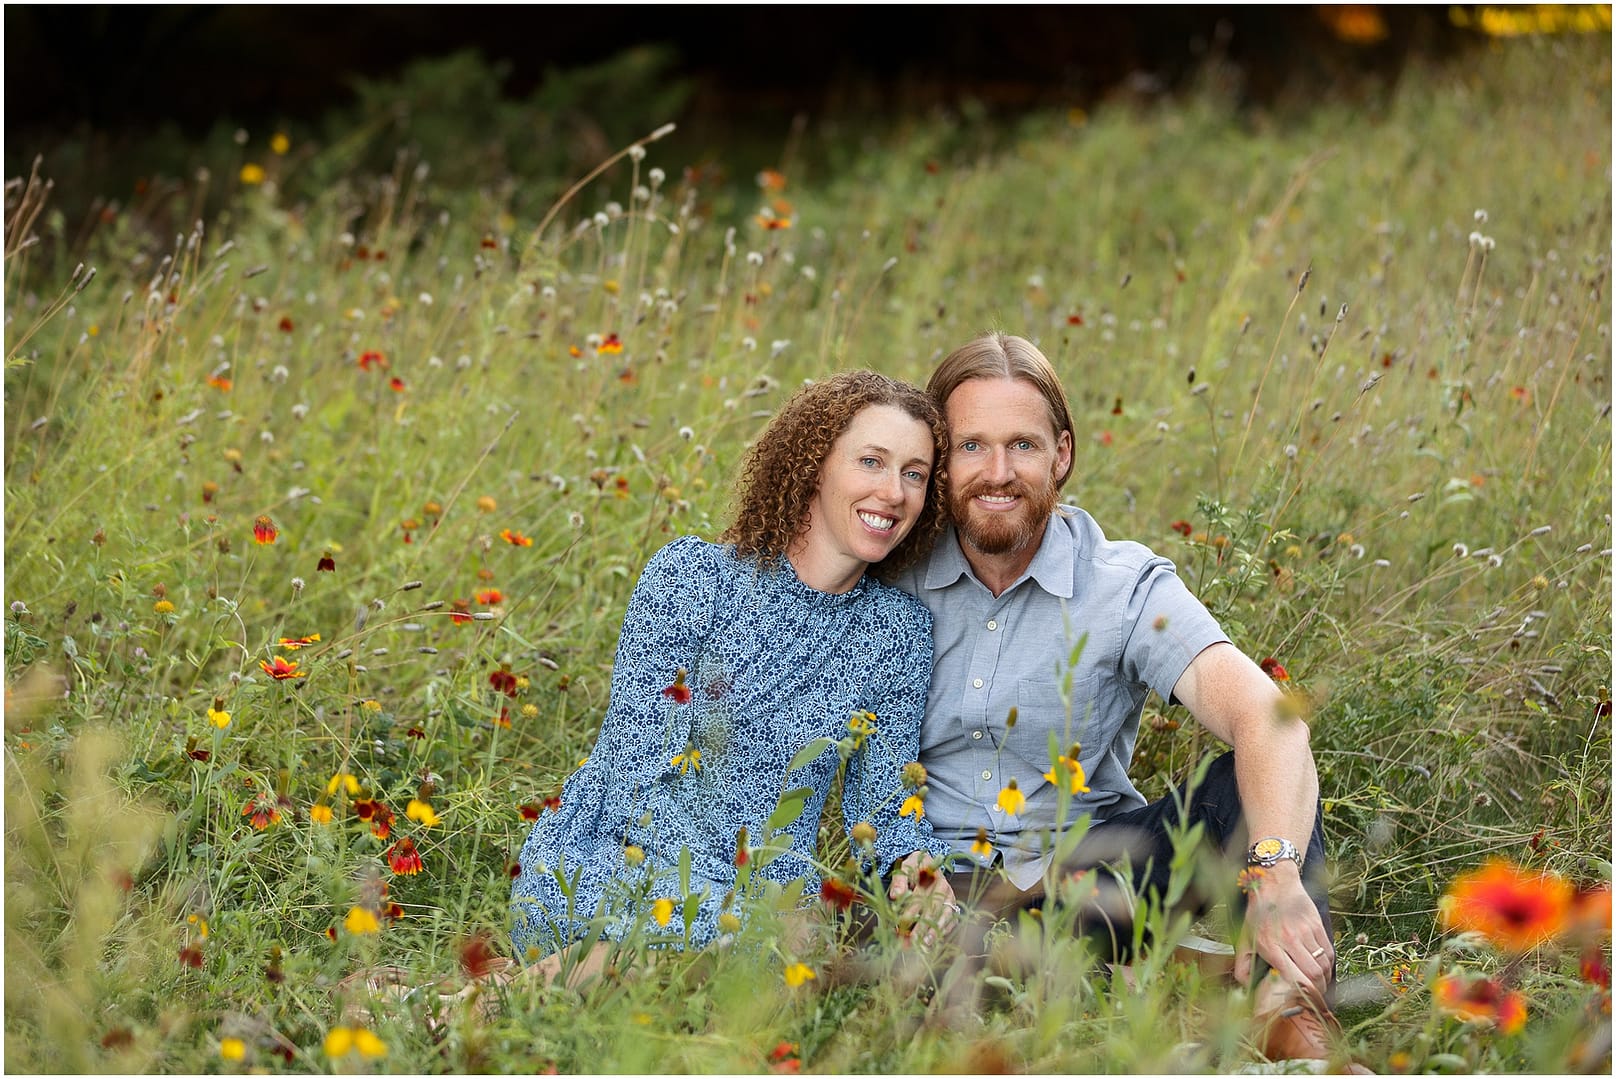 Mom and Dad snuggle in a field of wildflowers. Photo by Tiffany Hix Photography.